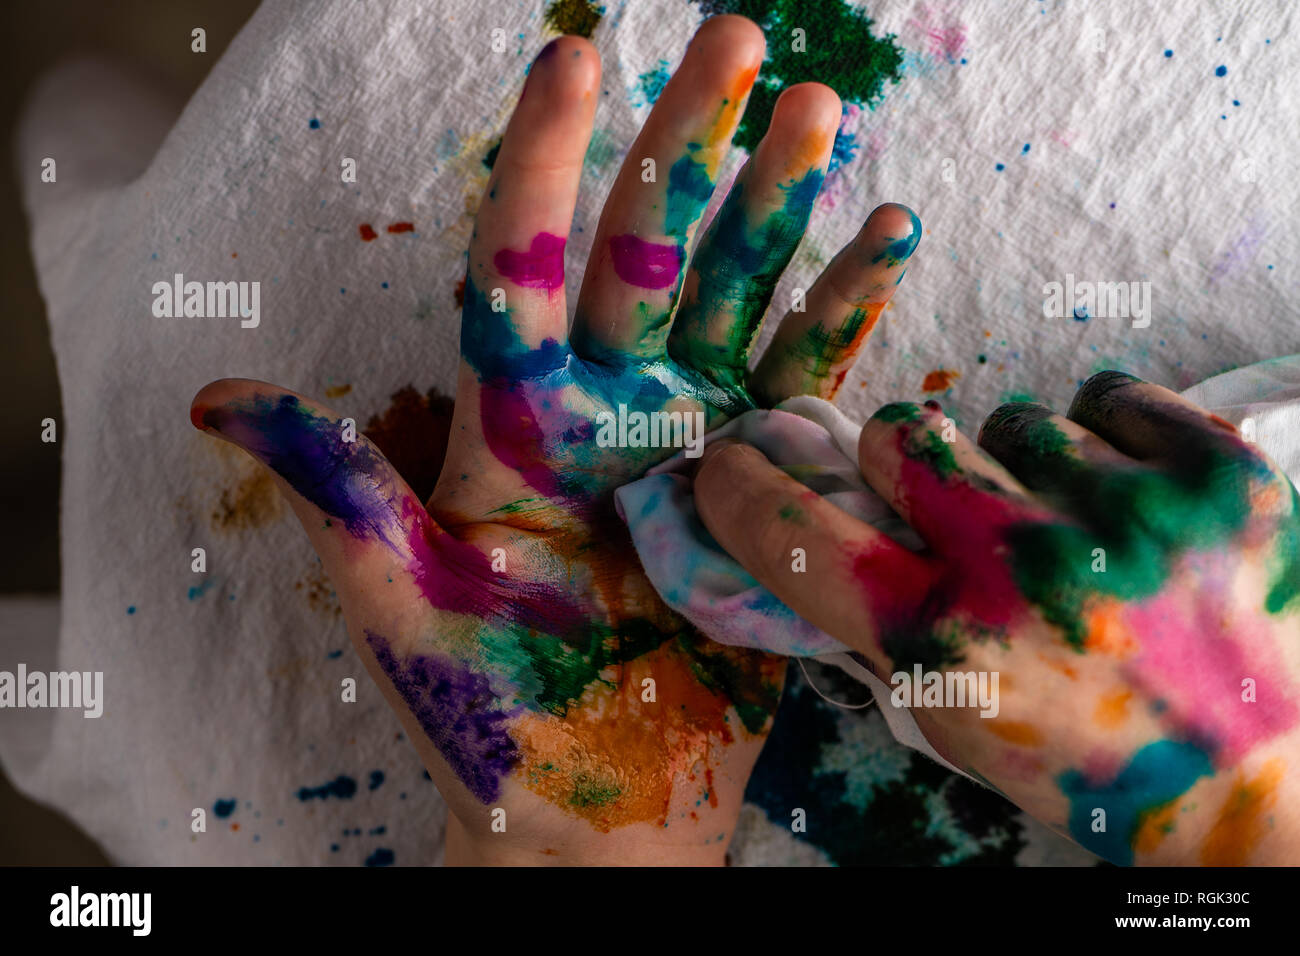 The Child's Hand Is Smeared With White Slime Stock Photo, Picture and  Royalty Free Image. Image 153580432.